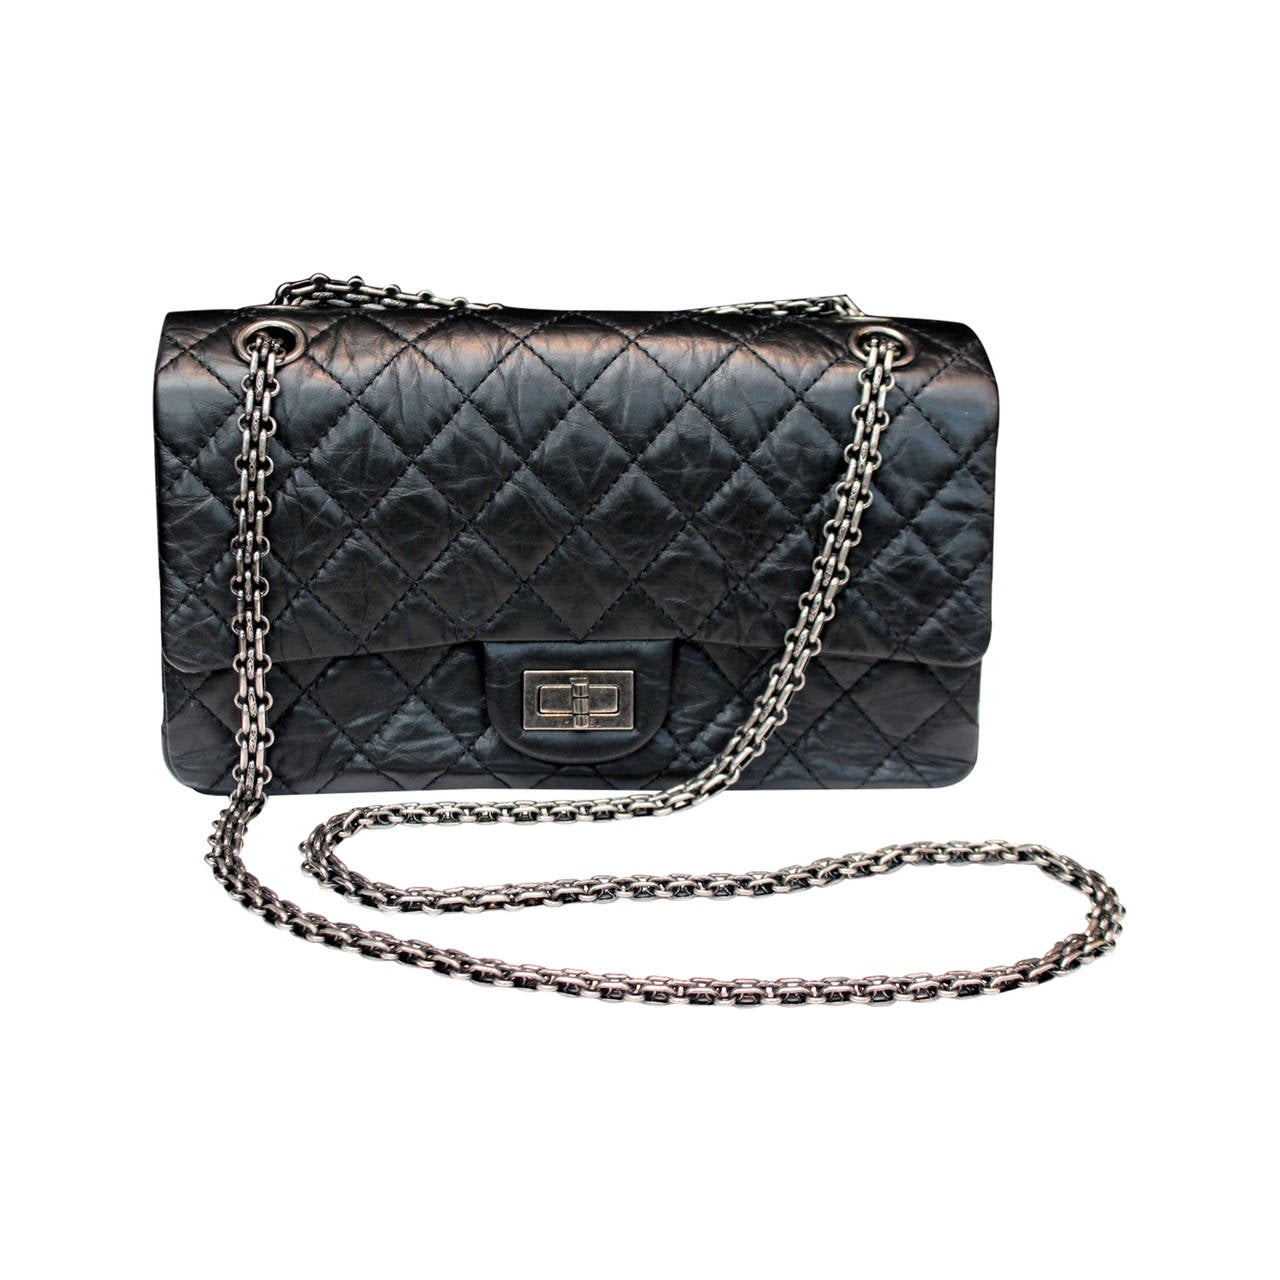 Black Quilted Washed Lambskin and Silver Chain 2.55 Chanel Bag at 1stdibs